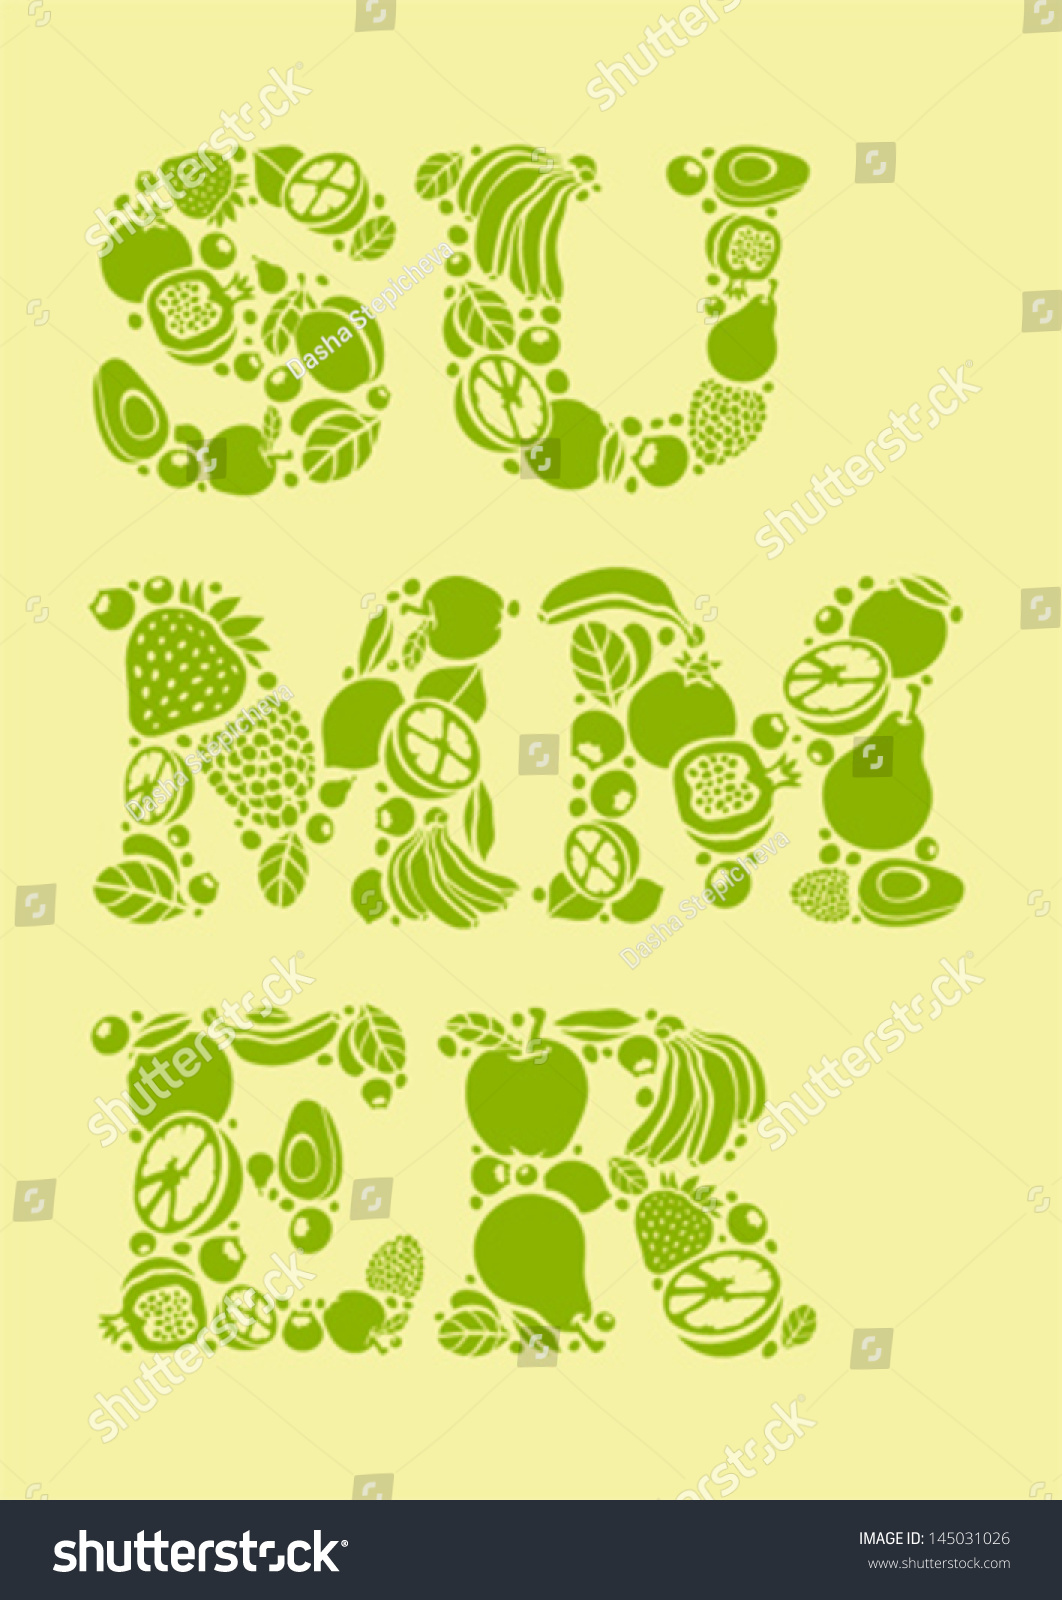 Word Summer Made Images Different Fruit Vectores En Stock 